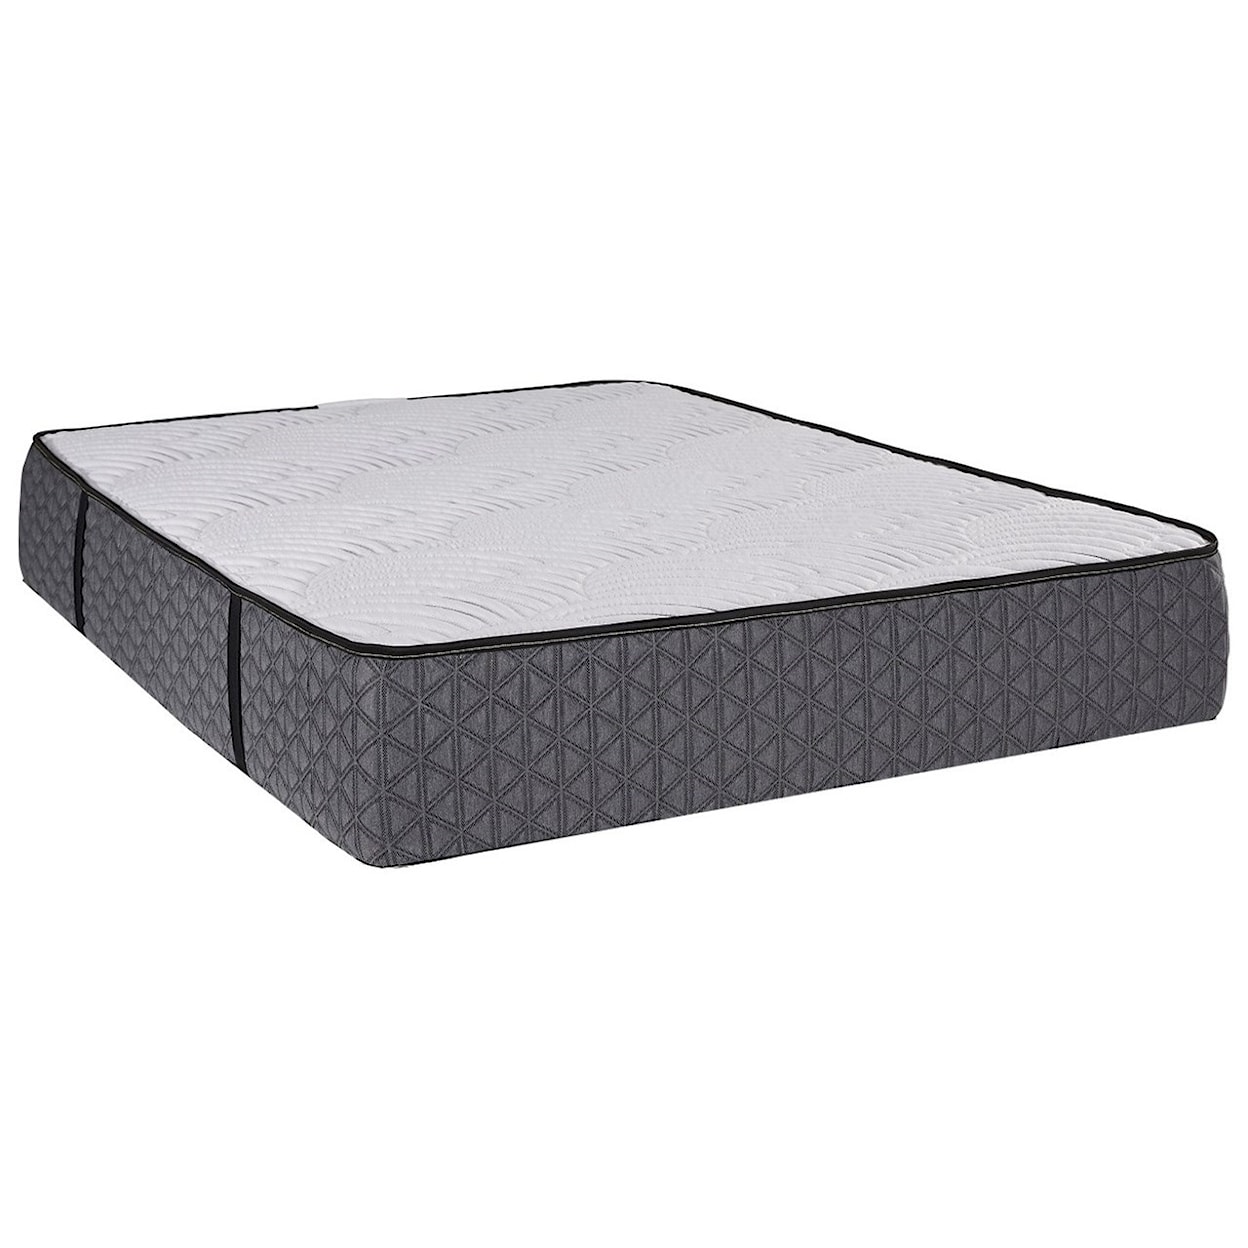 Restonic Aphrodite Firm King Pocketed Coil Mattress